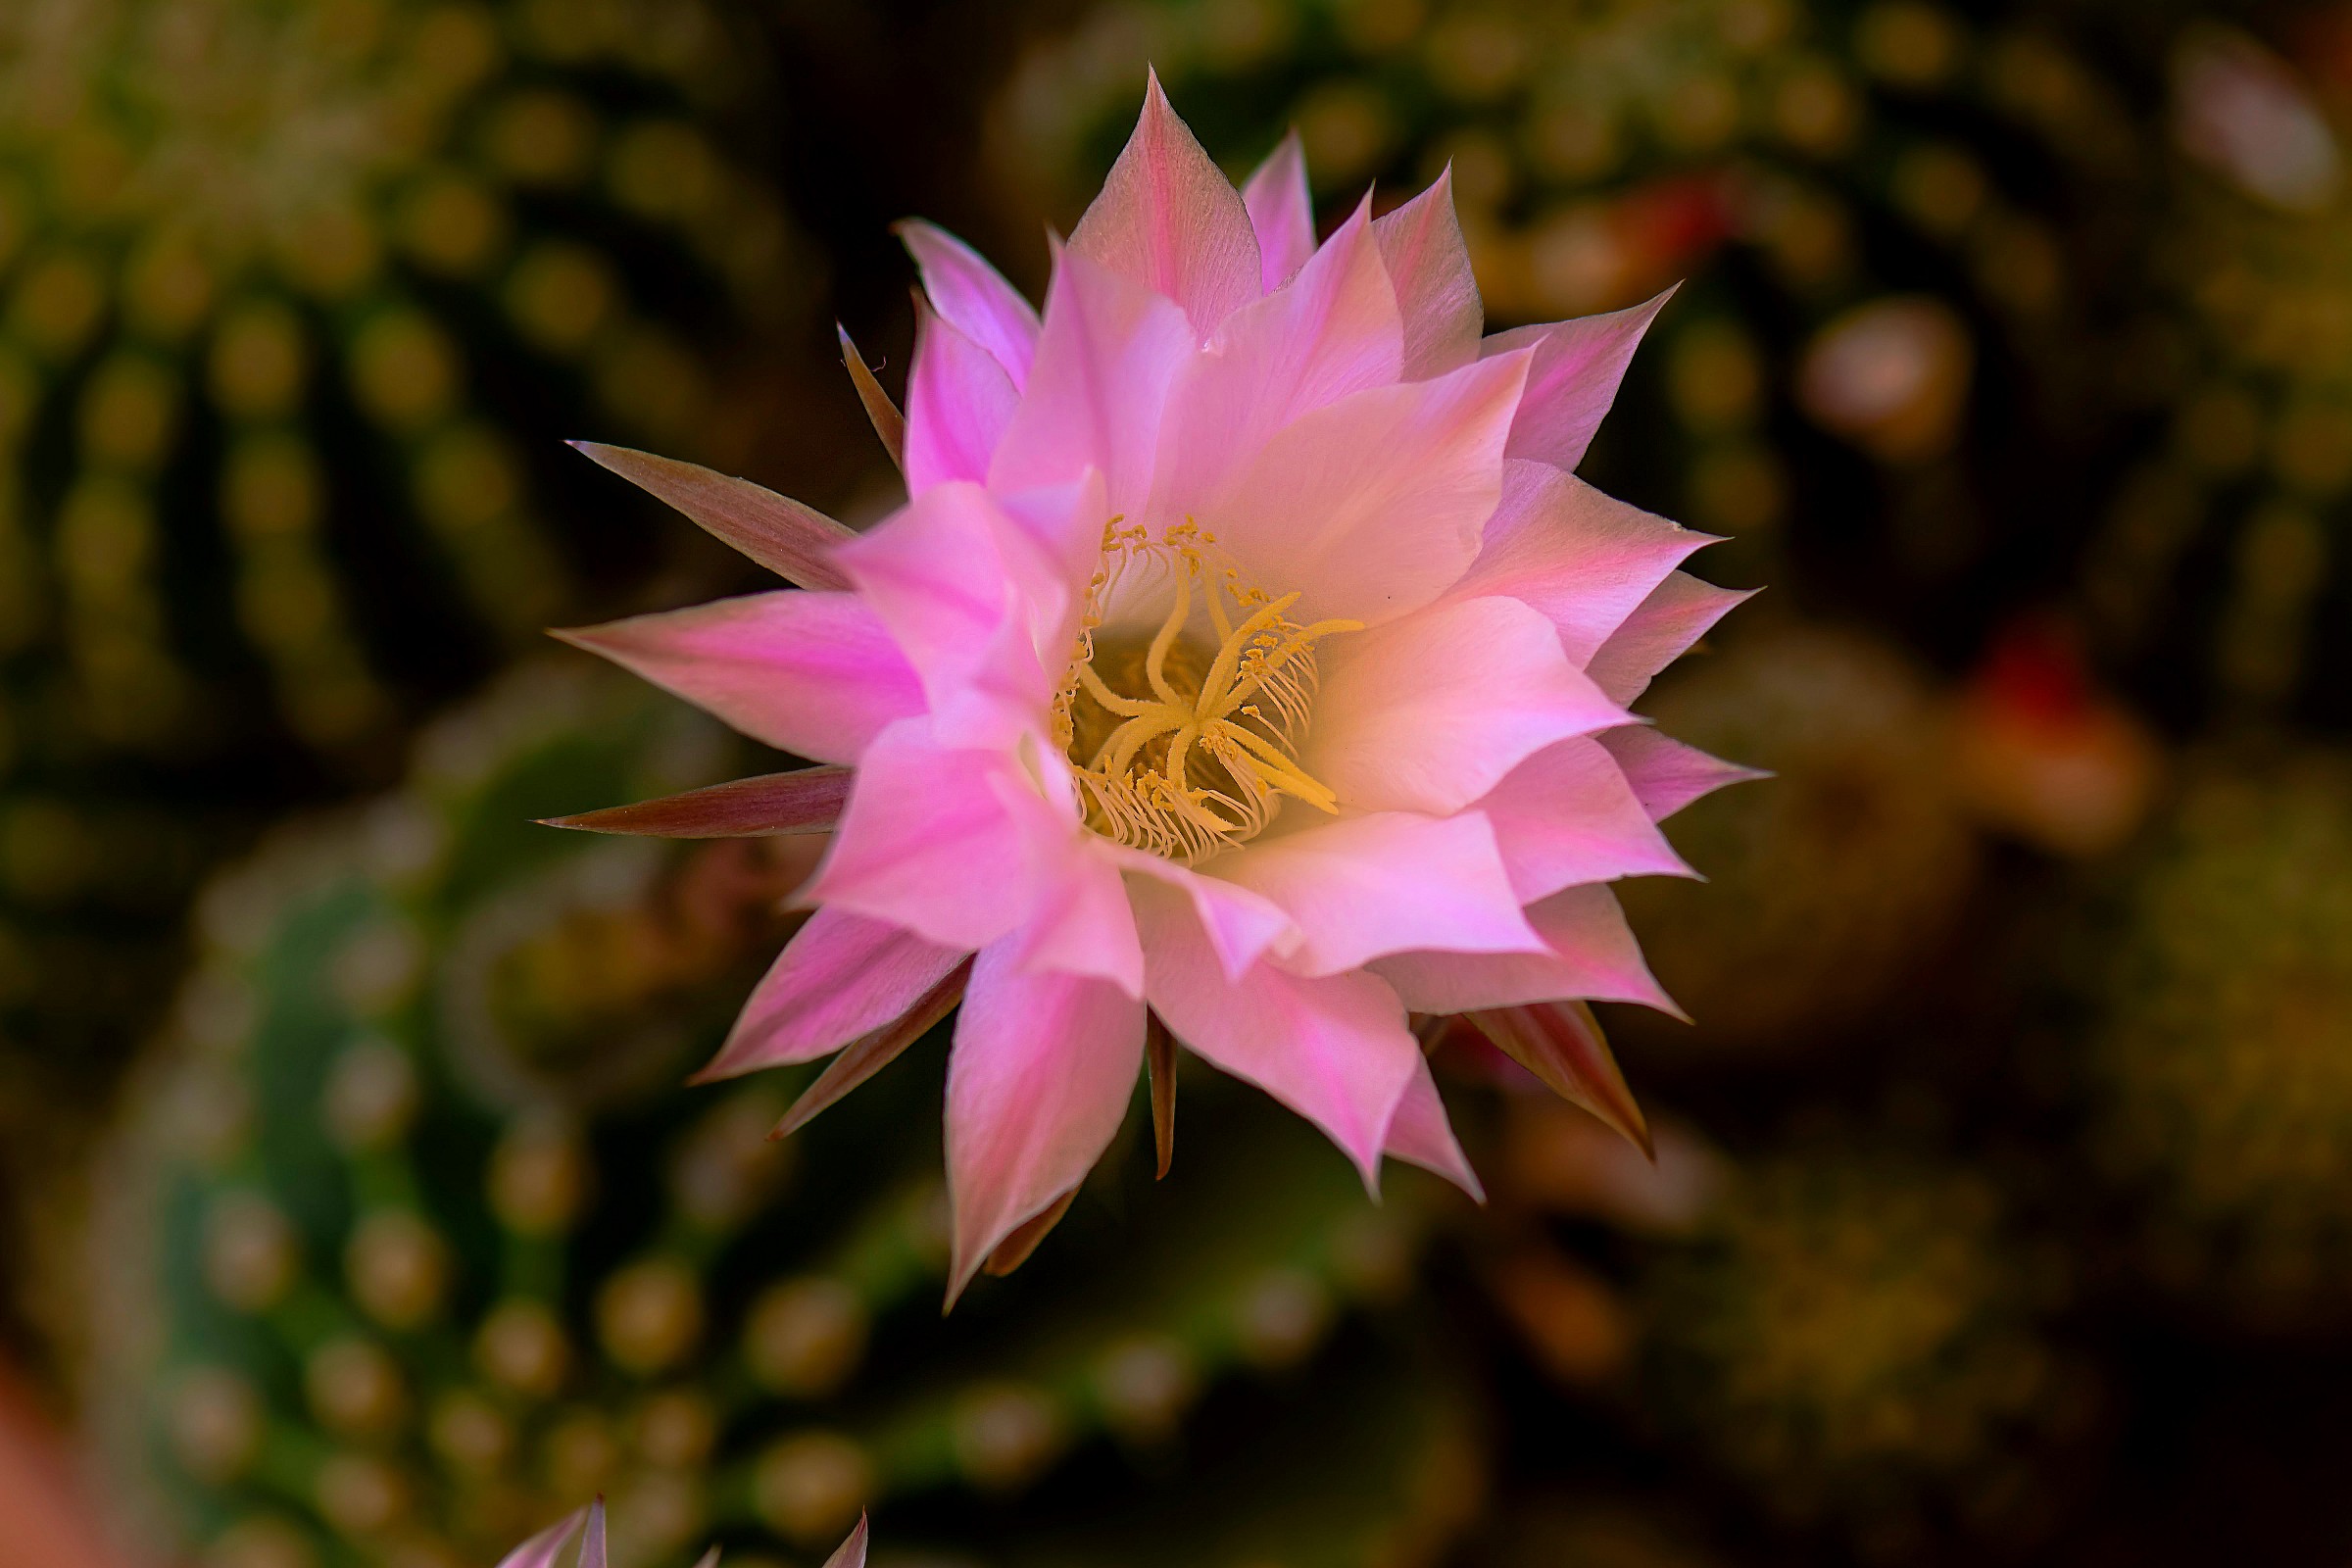 Echinopsis Multiplex, a flower in a world of thorns...